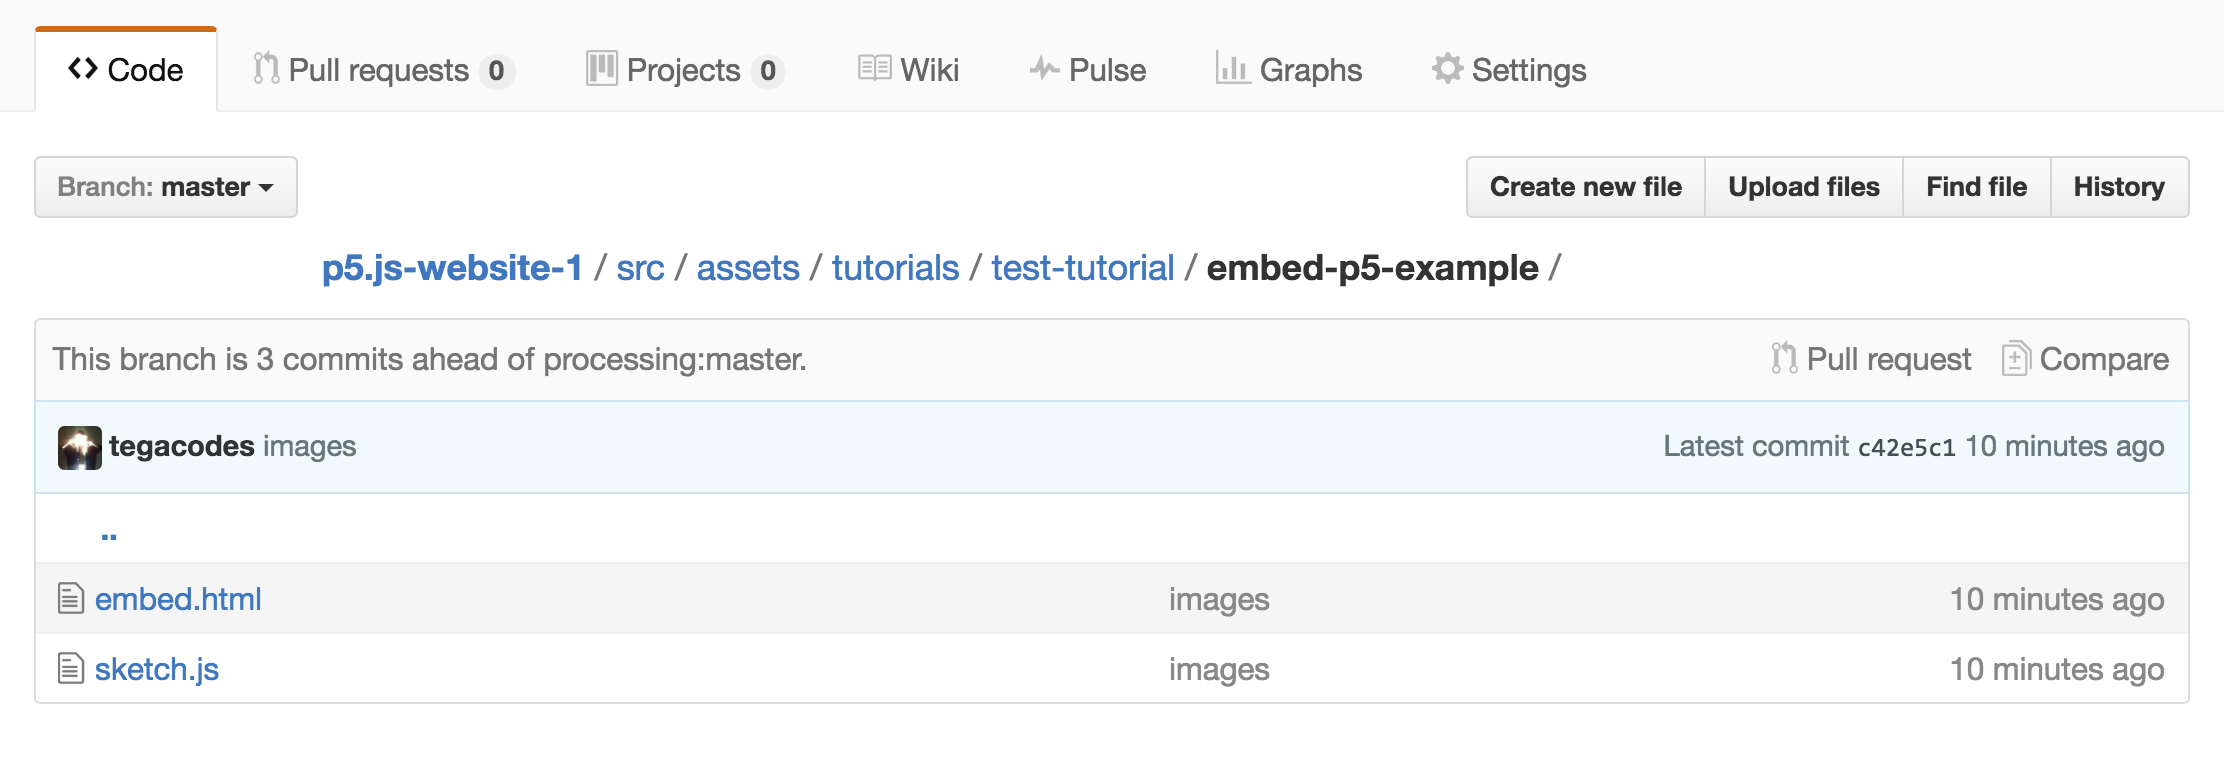 Screenshot of a GitHub page showing an example of an embed.html file for a tutorial sketch.